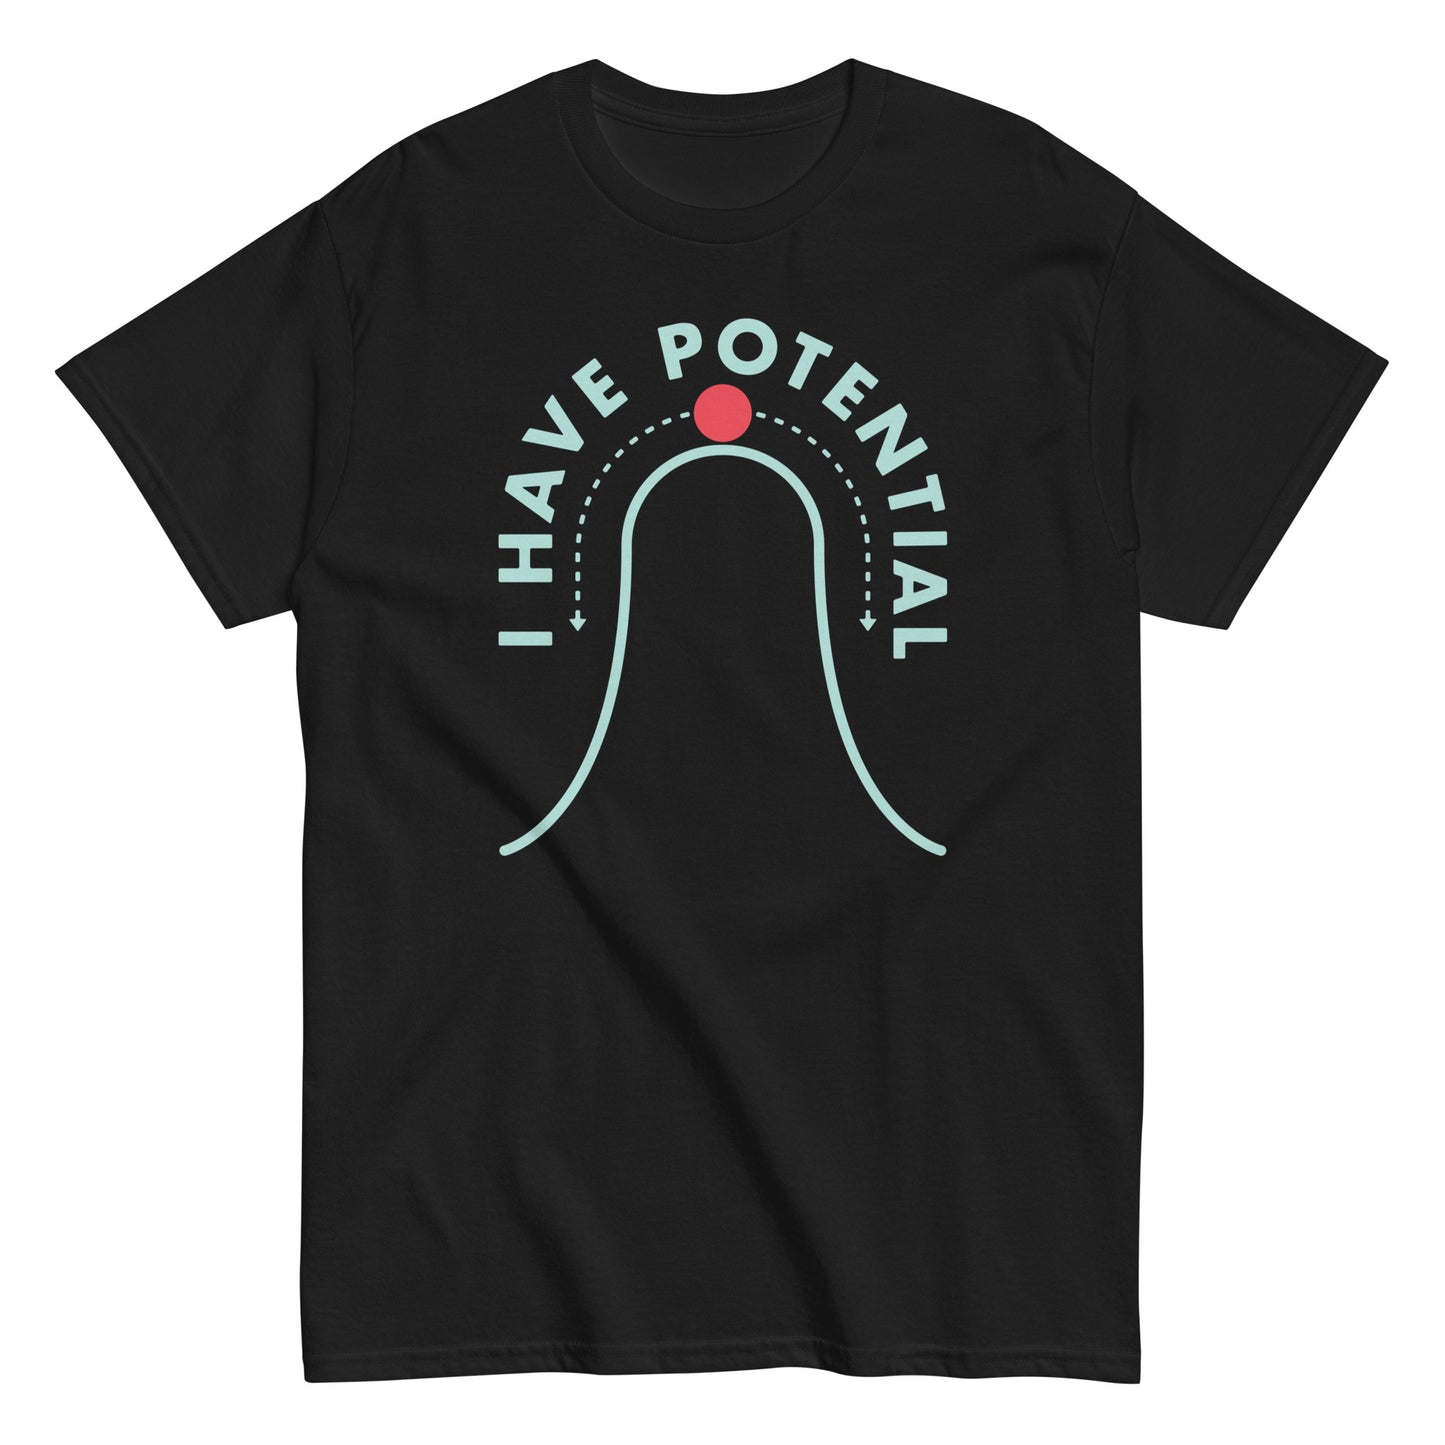 I Have Potential Men's Classic Tee